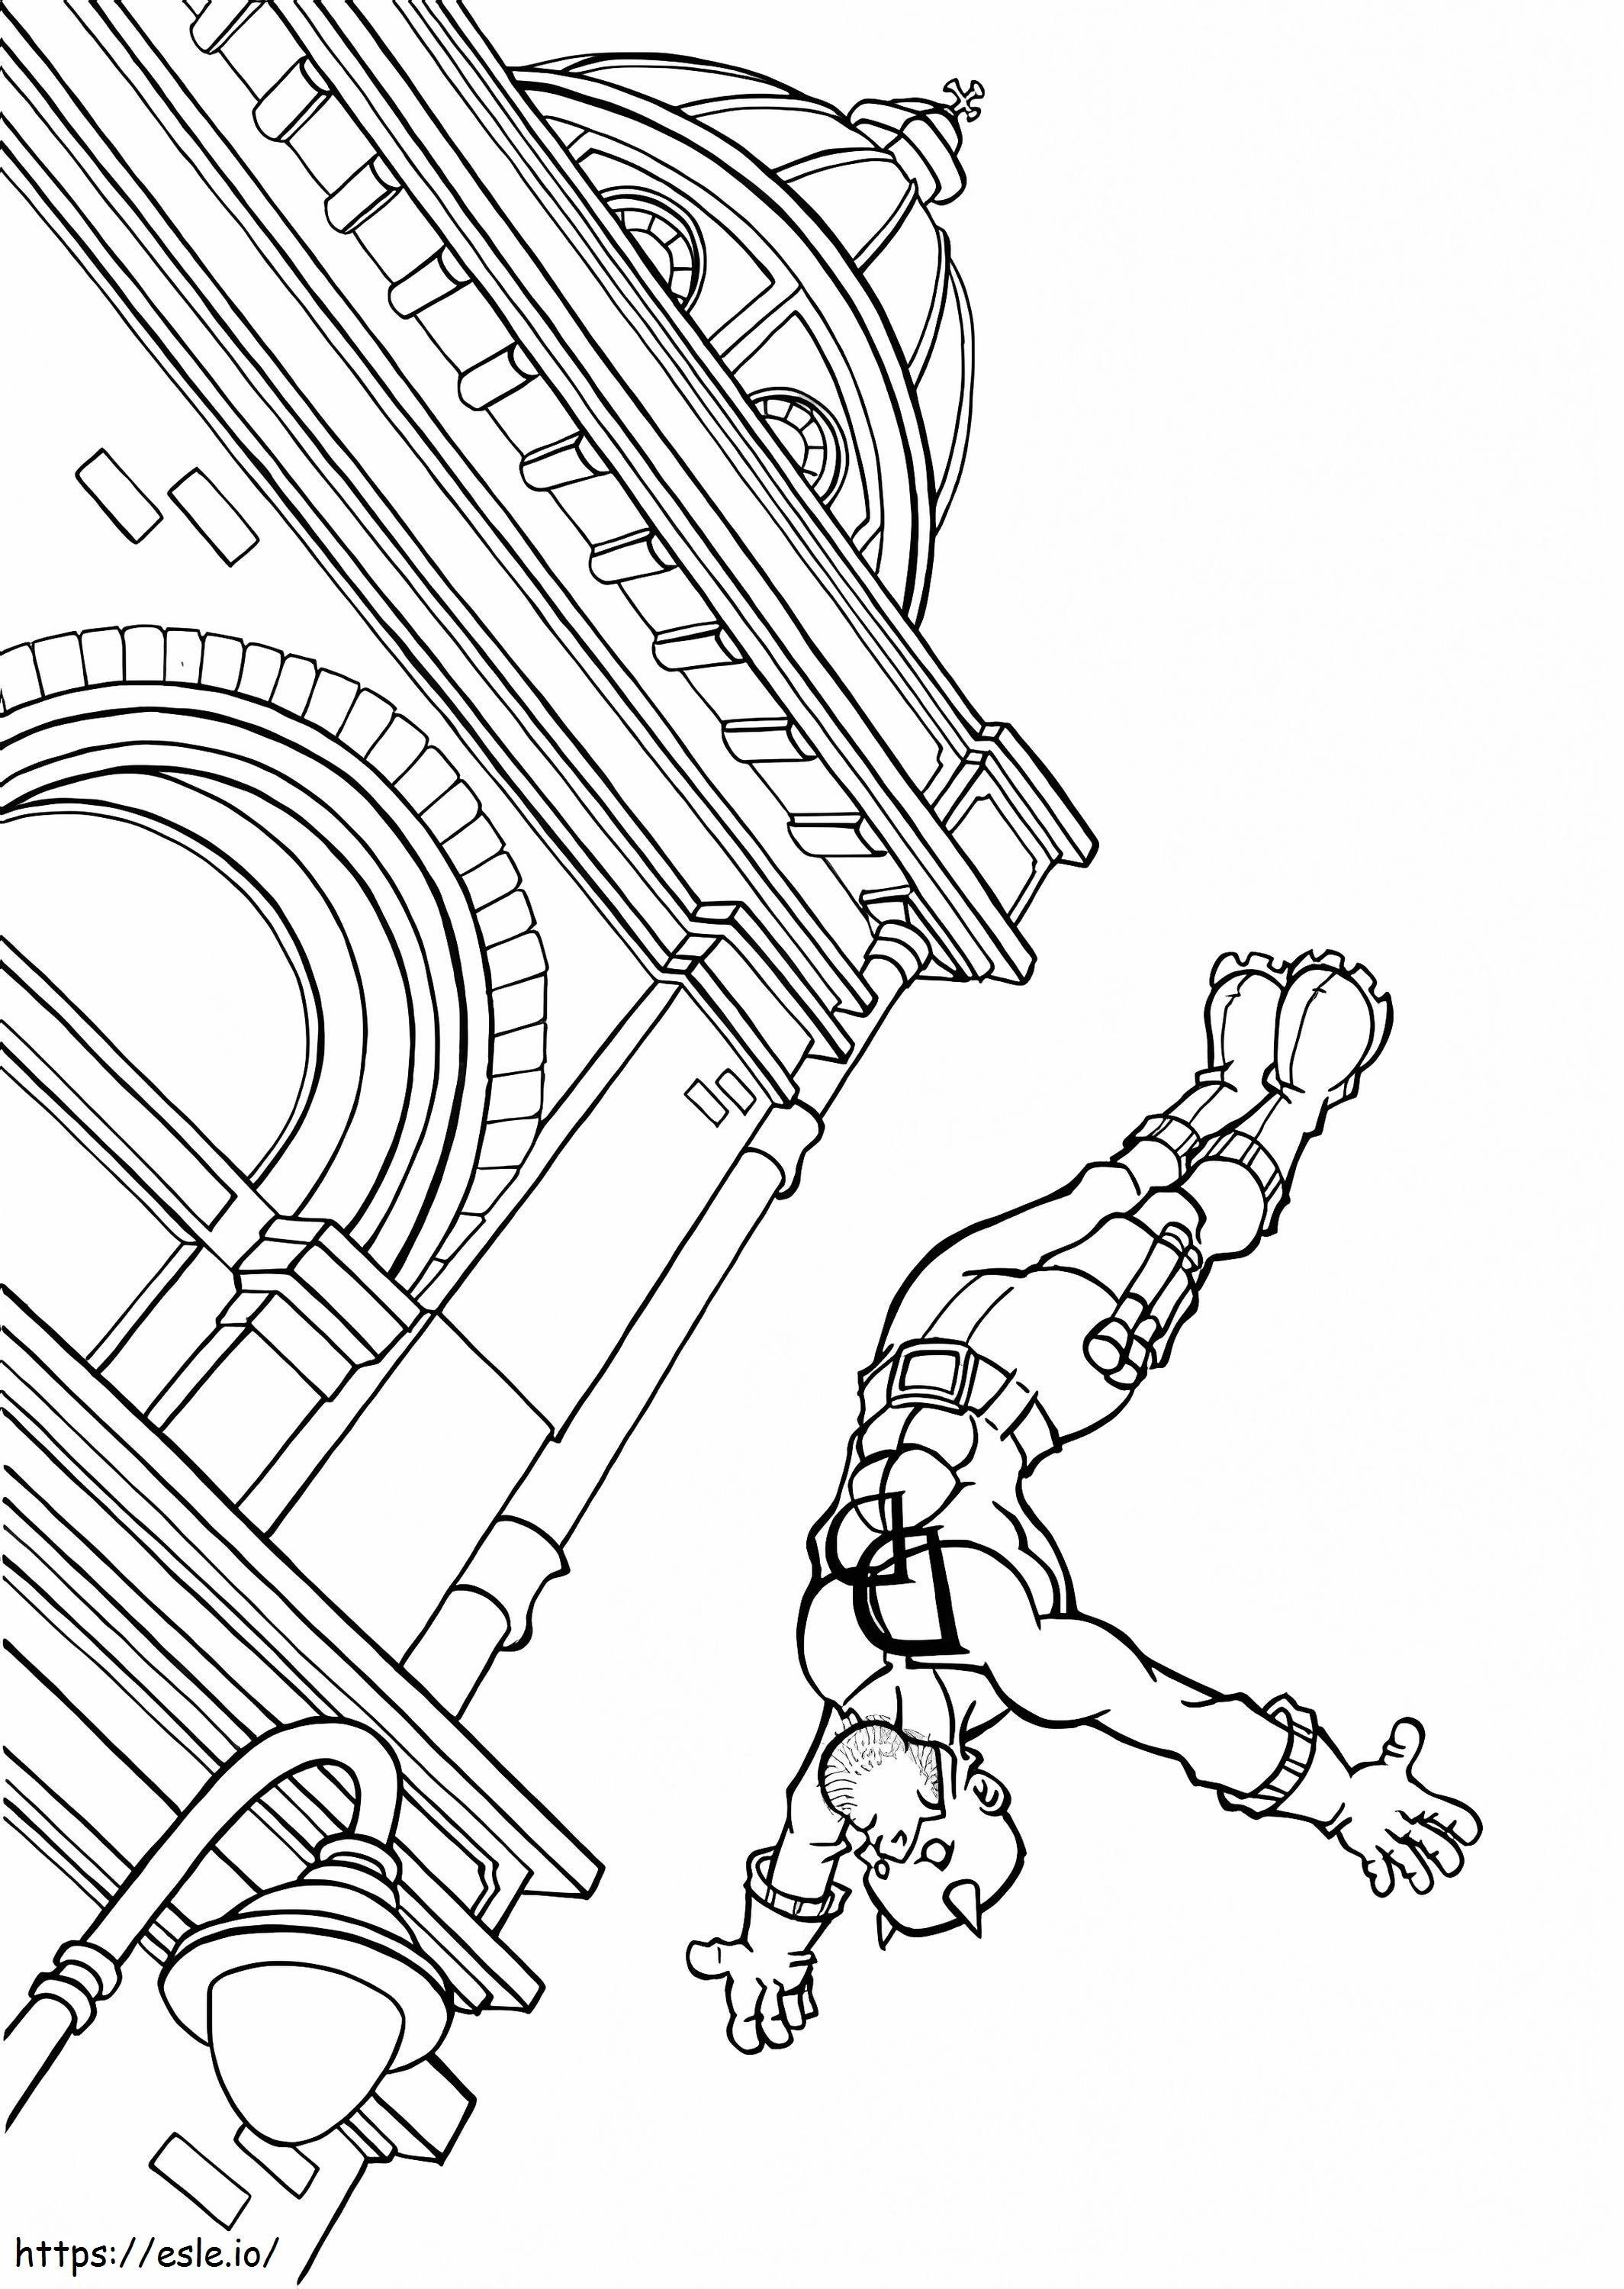 Animated Daredevil coloring page